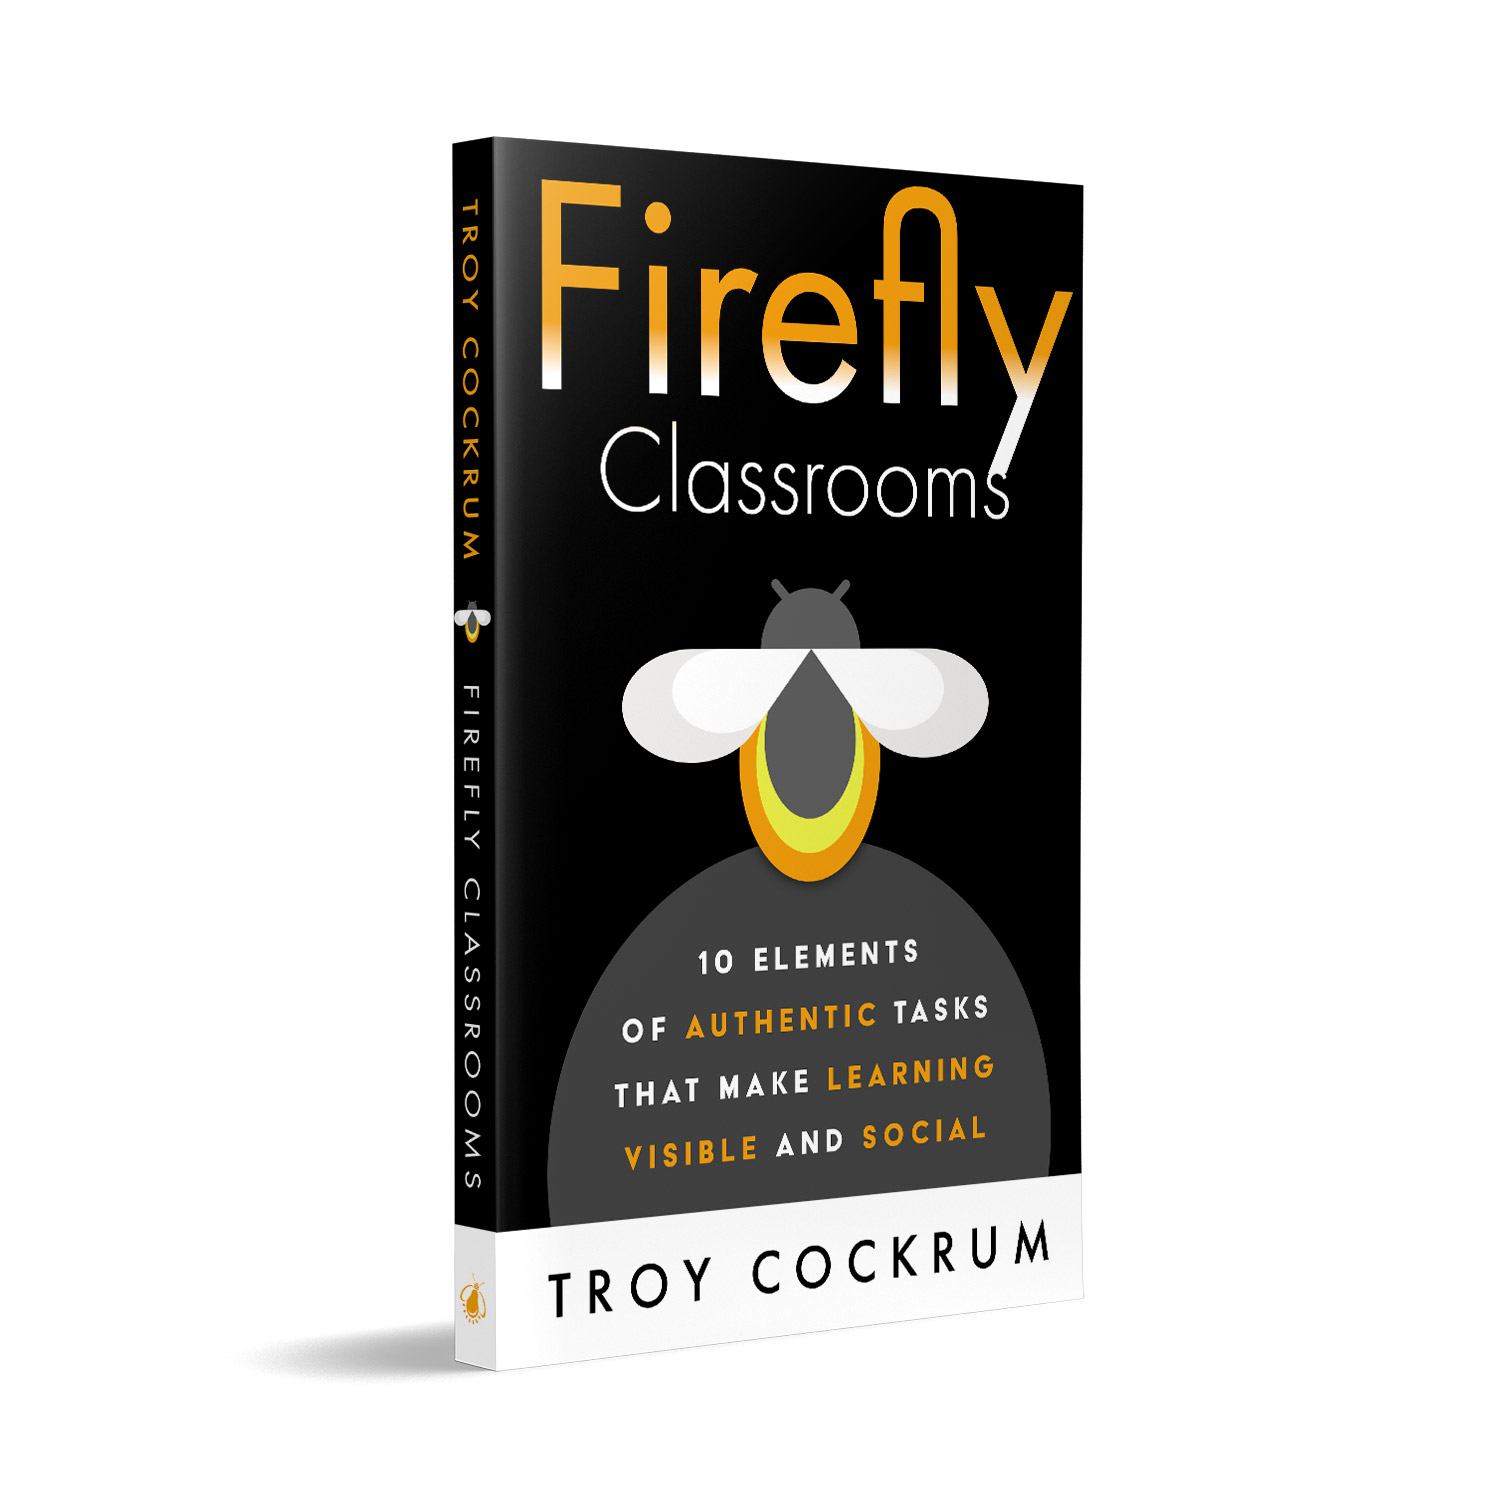 'Firefly Classrooms' is an excellent 'how to' book on harnessing the creativity of schoolchildren, by Troy Cockrum. The book cover and interior were designed by Mark Thomas, of coverness.com. To find out more about my book design services, please visit www.coverness.com.